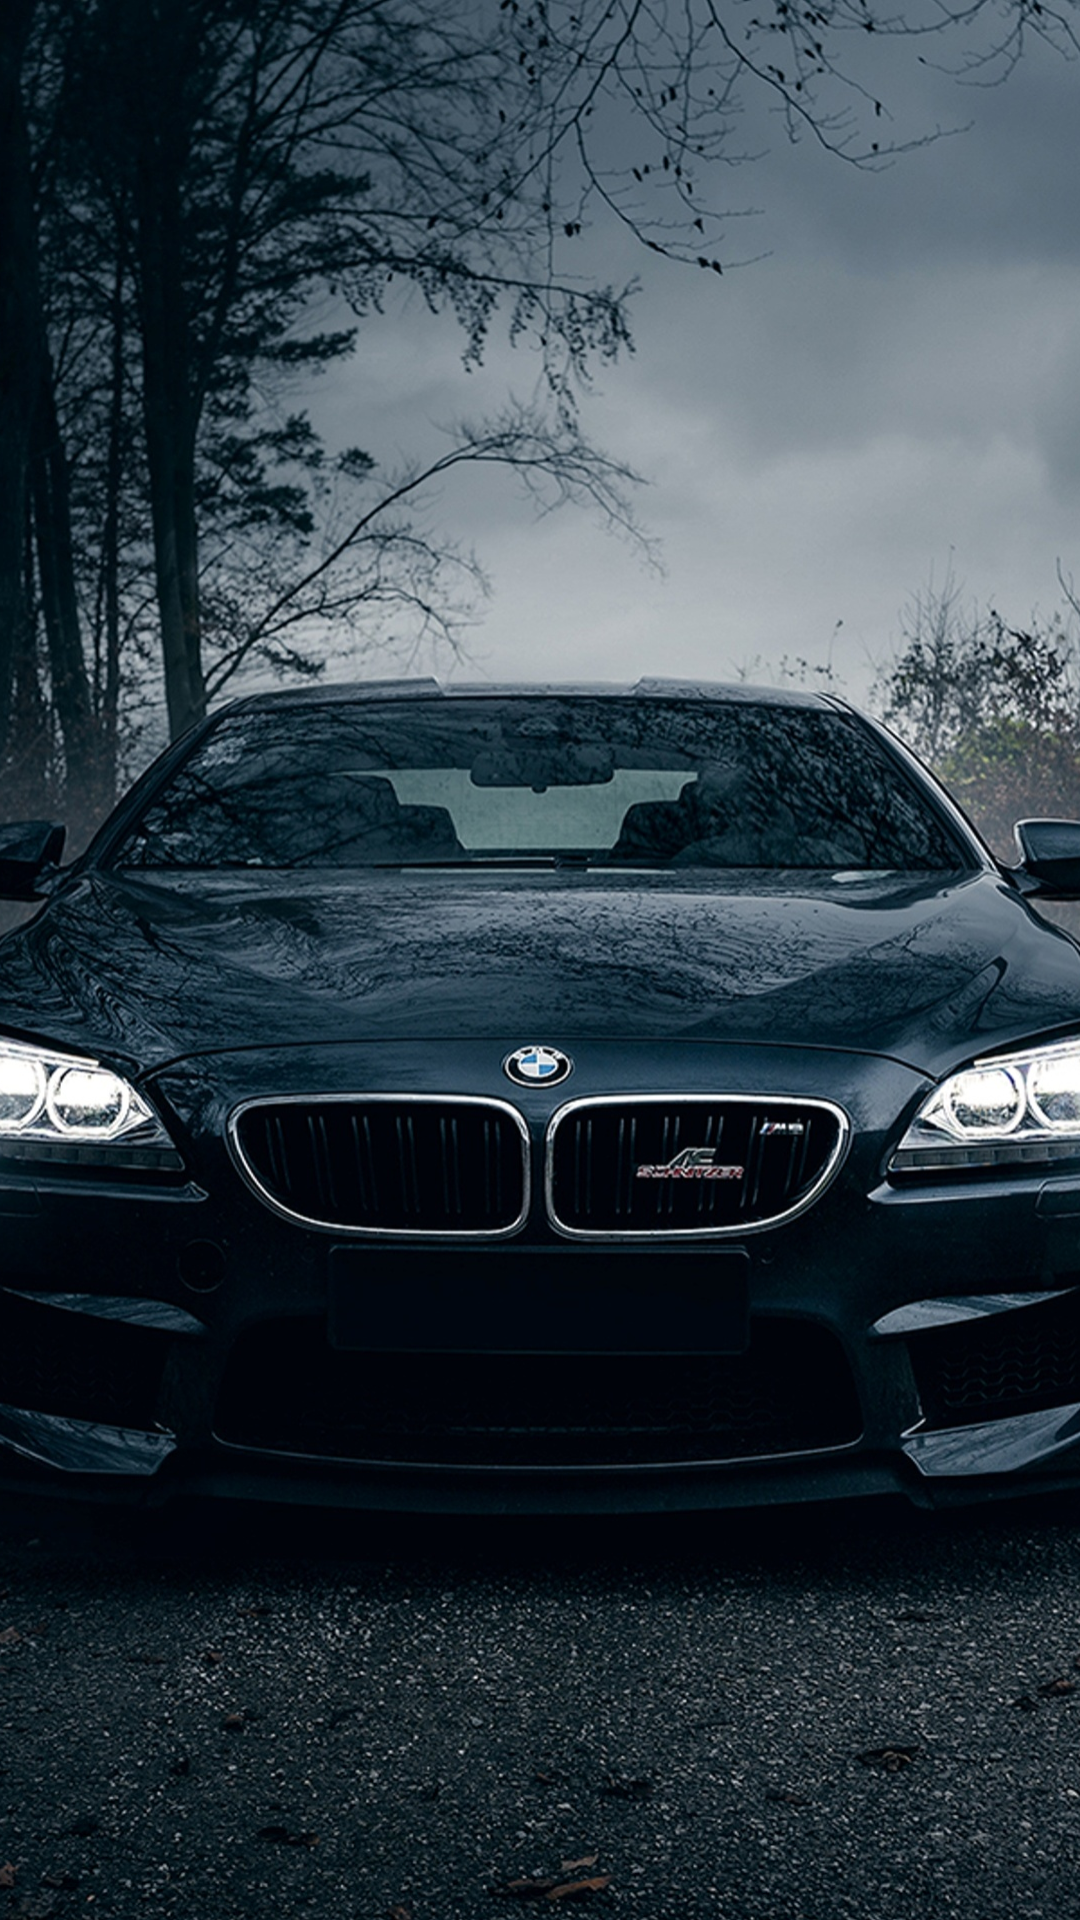 bmw hd wallpapers for mobile,land vehicle,vehicle,car,luxury vehicle,personal luxury car